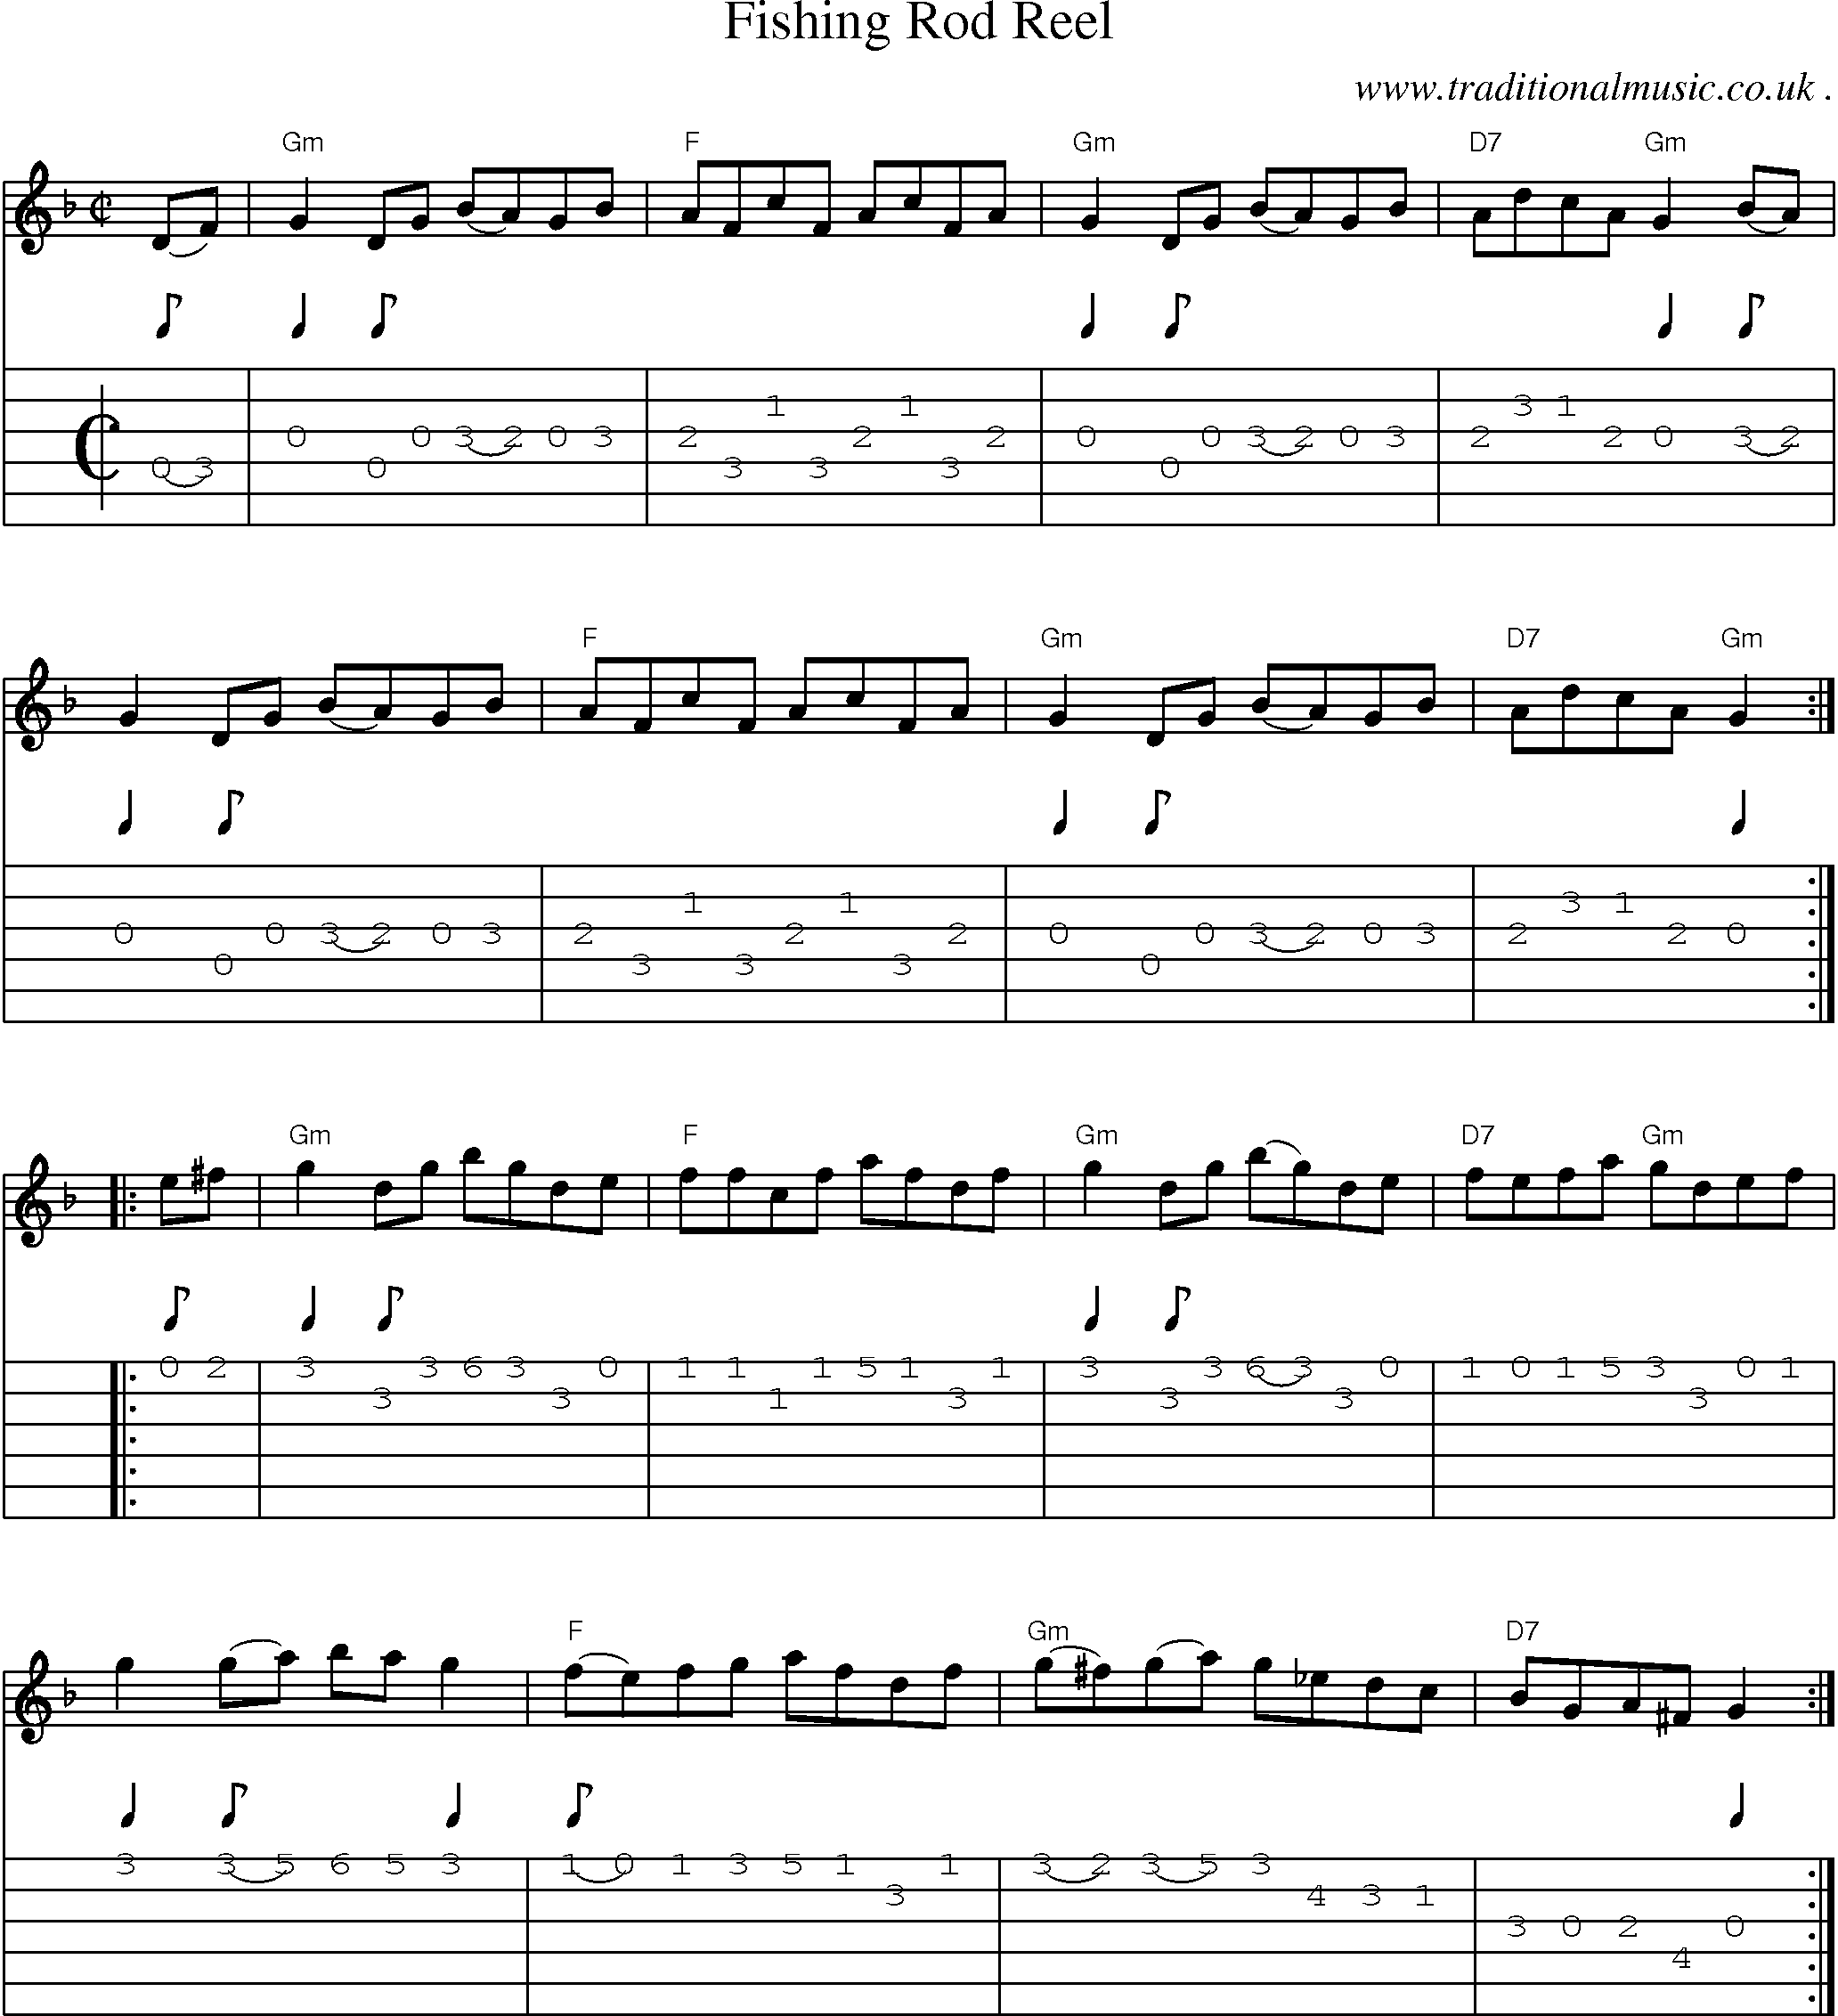 Music Score and Guitar Tabs for Fishing Rod Reel